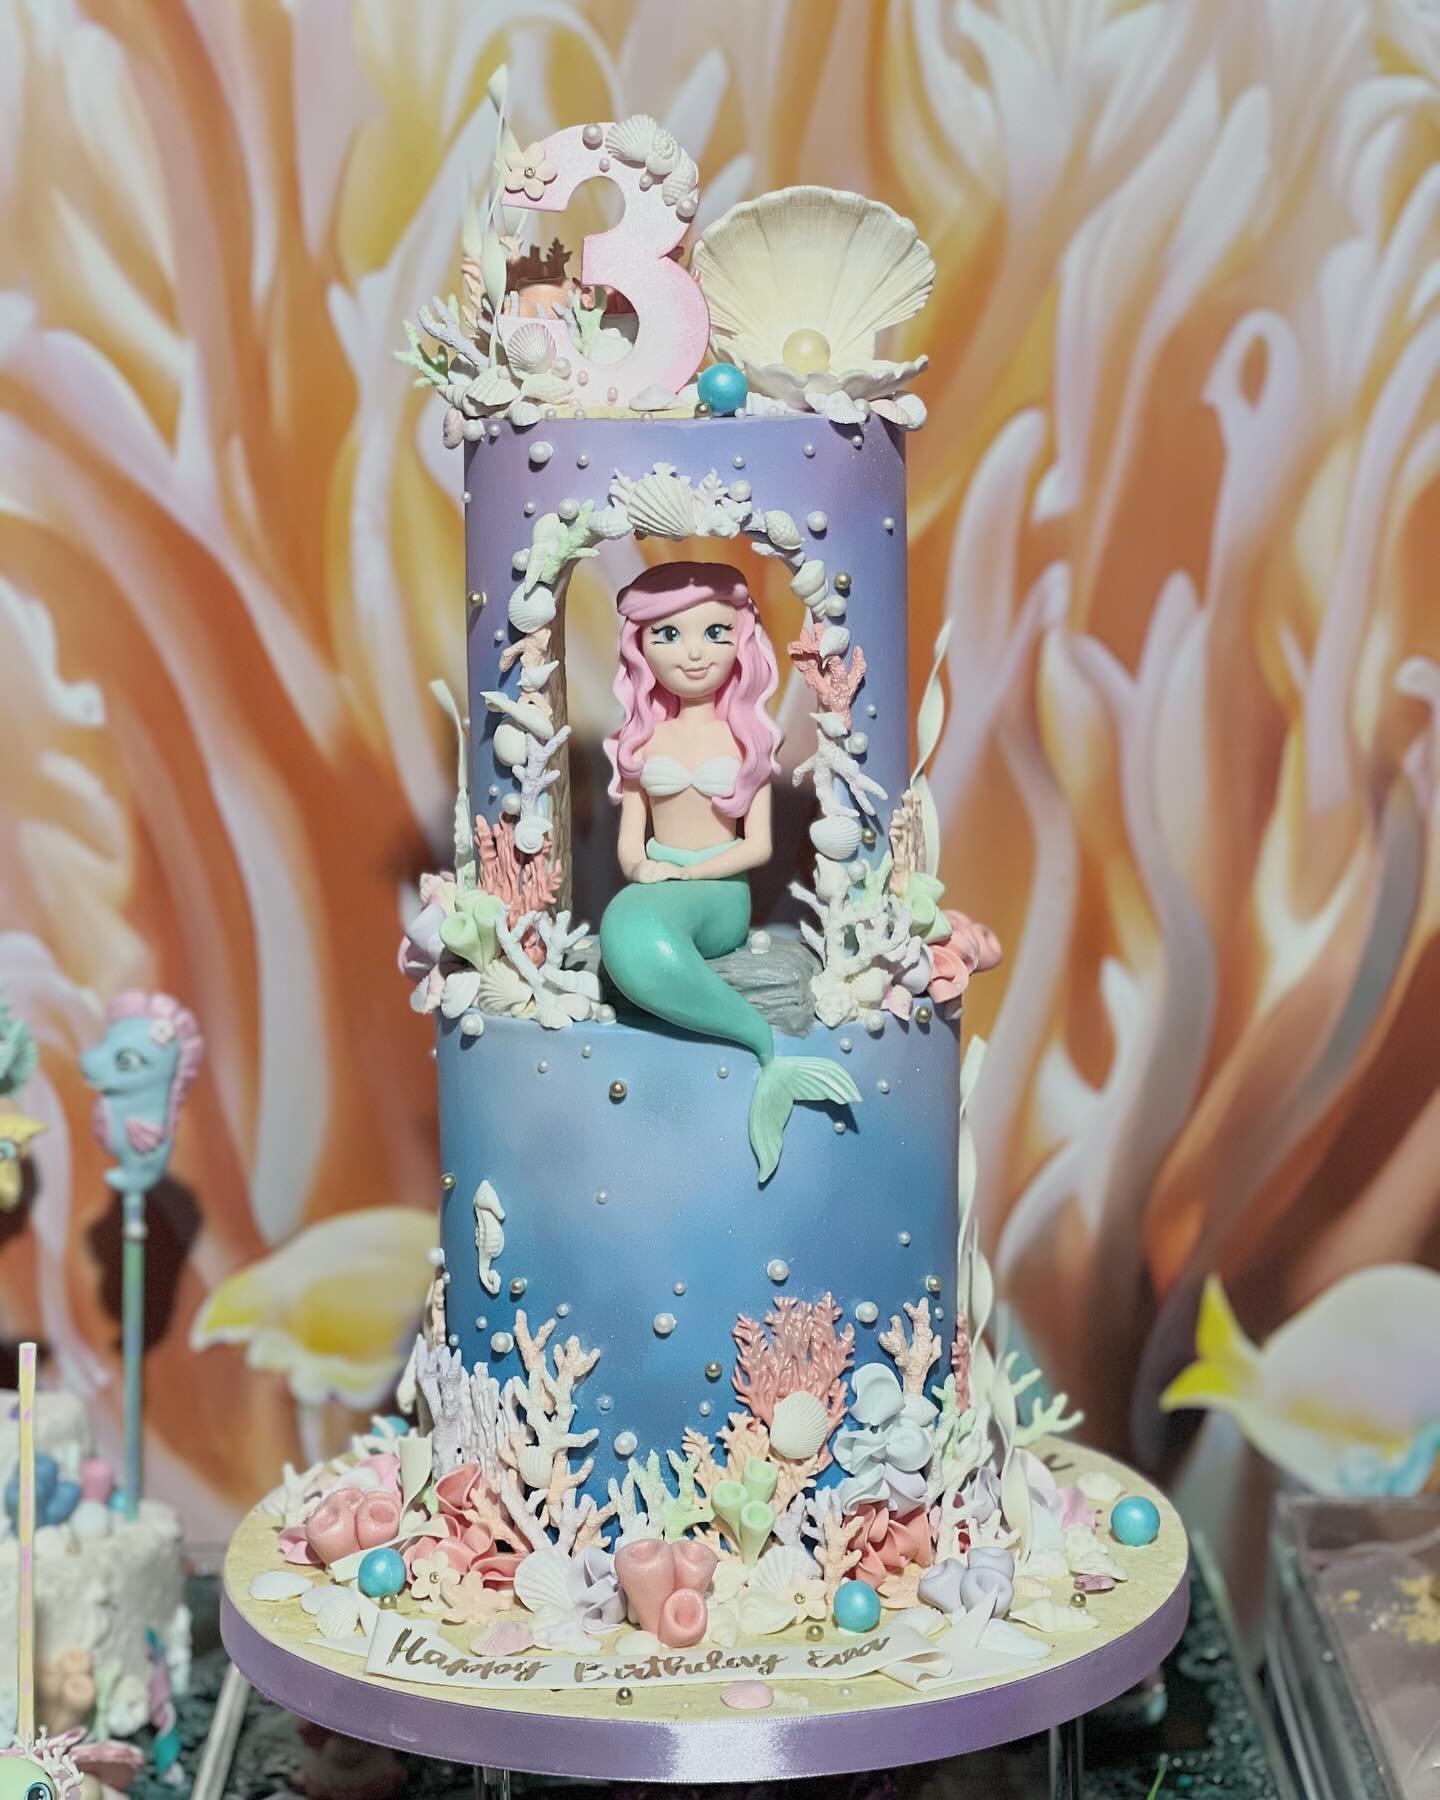 An Under The Sea cake-scape!

This cake table was a treasure trove of treats - macarons, cakepops, mini-cakes and cupcakes. All presented on a real jelly table 🌊 

Swipe to see the little mini cakes with the cutest sea creatures on top. I think the 